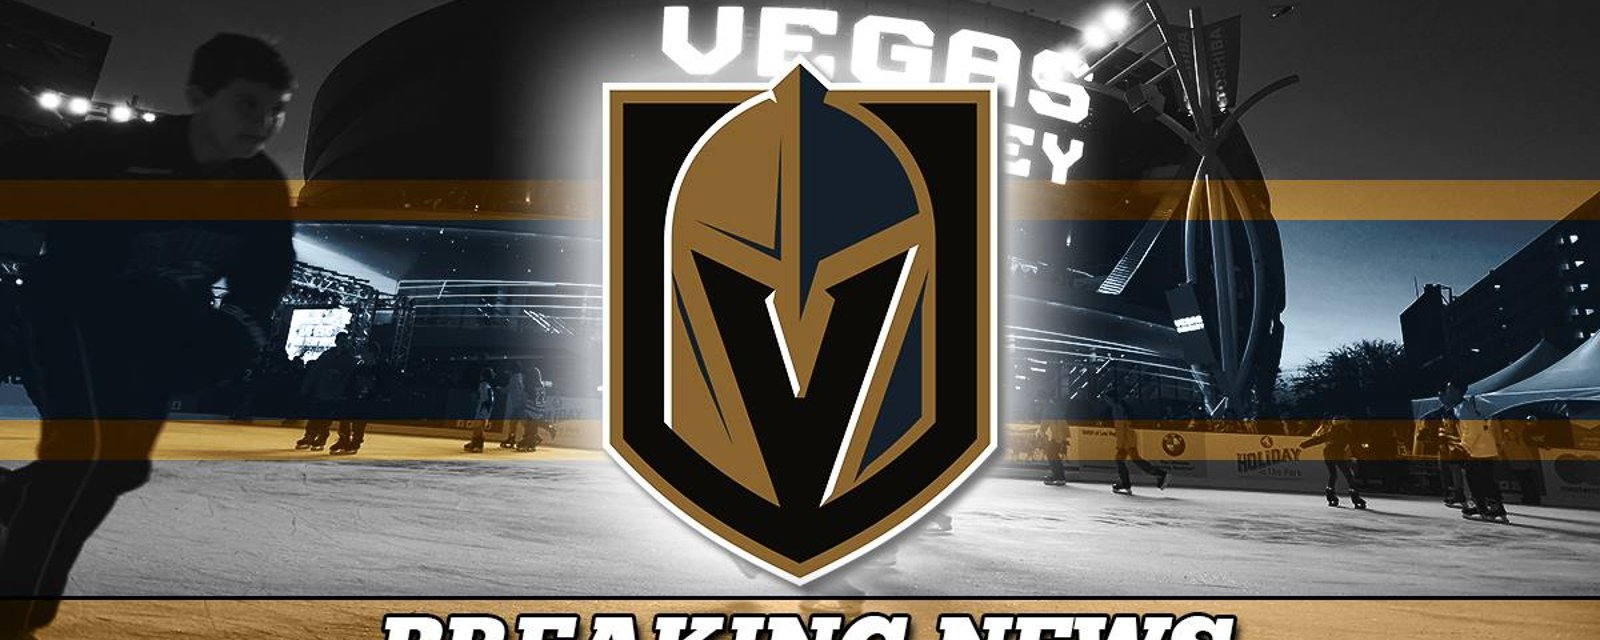 Breaking: A whole new kind of trade now available for Las Vegas!